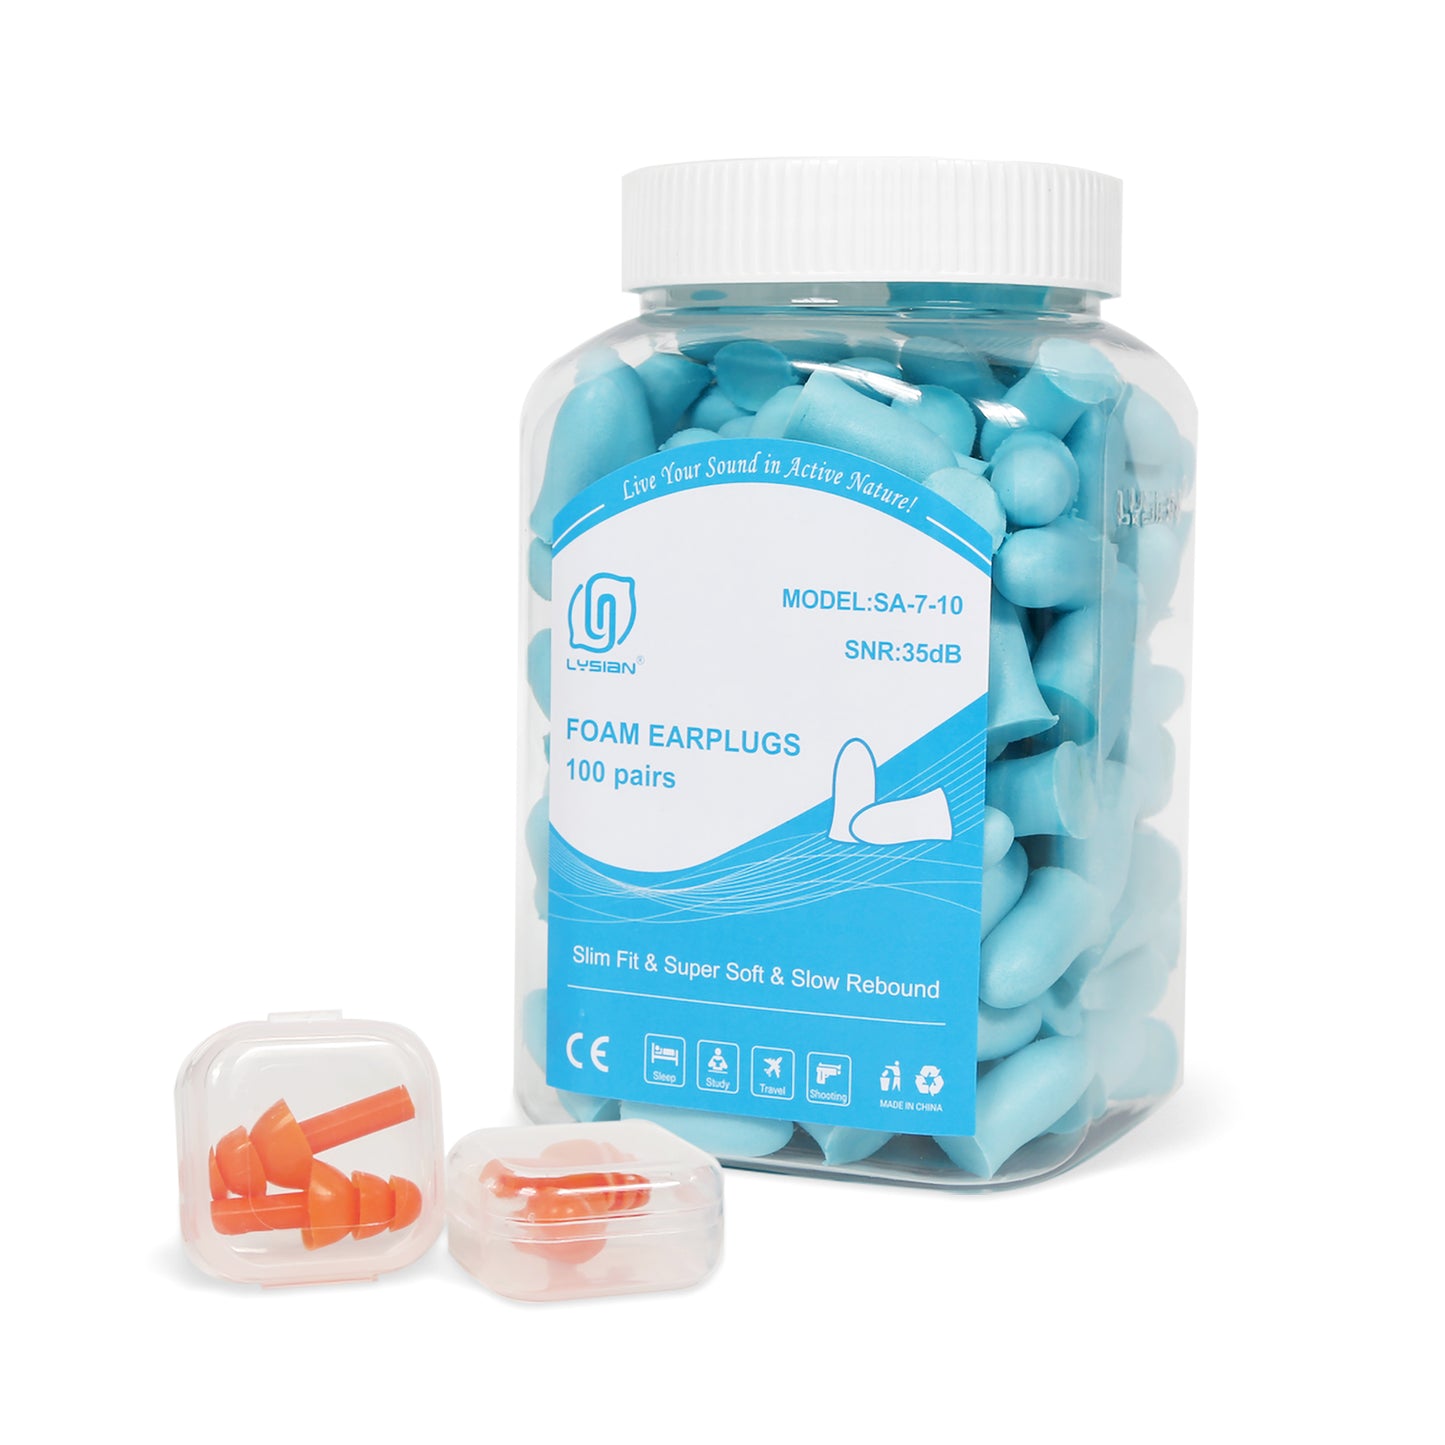 Slim Size Foam Ear Plugs for Small Ear Canals, 100 Pairs, 35dB SNR Noise Canceling Earplugs for Sleeping, Shooting, Studying